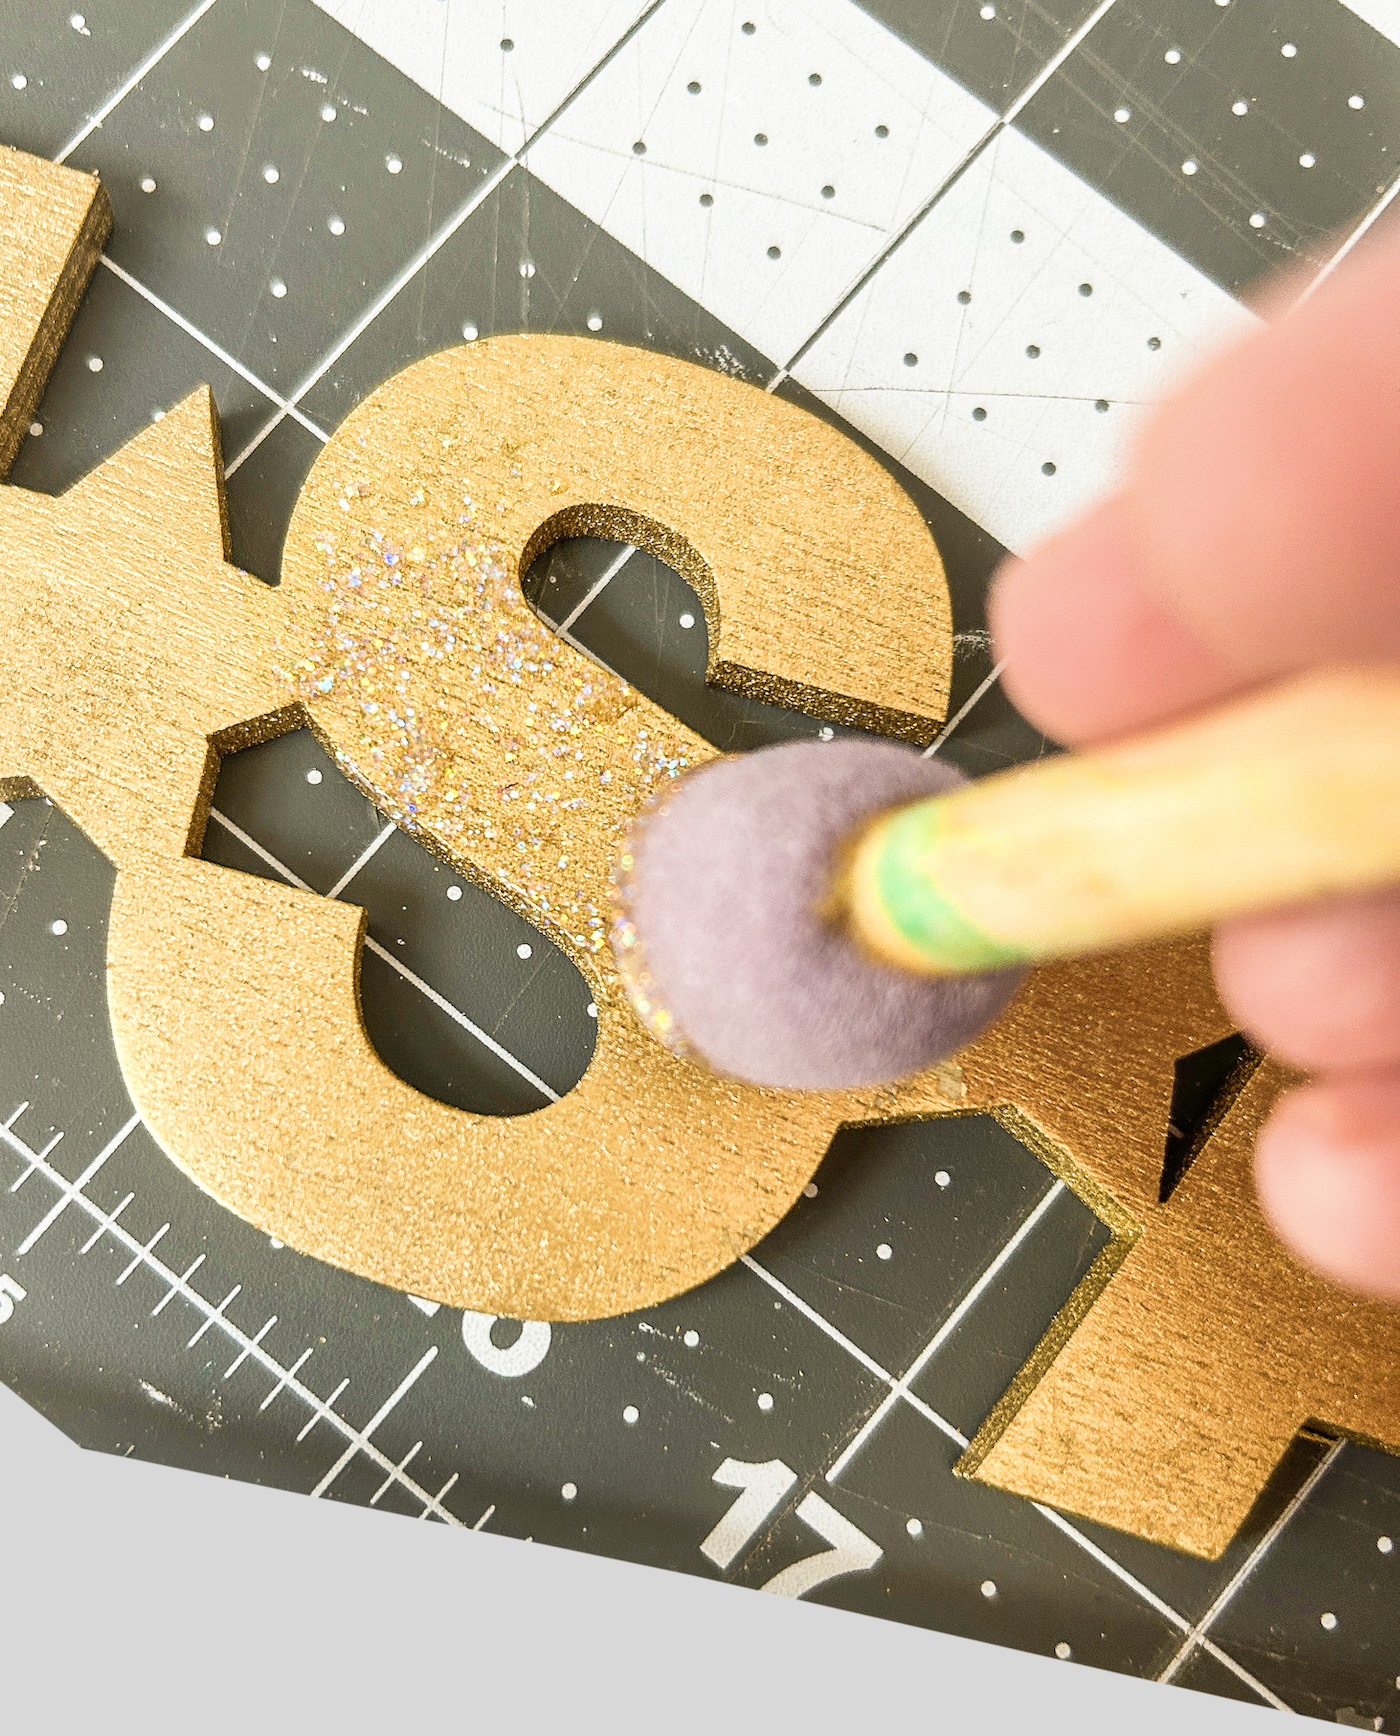 Using a spouncer to apply glitter paint to the gold word